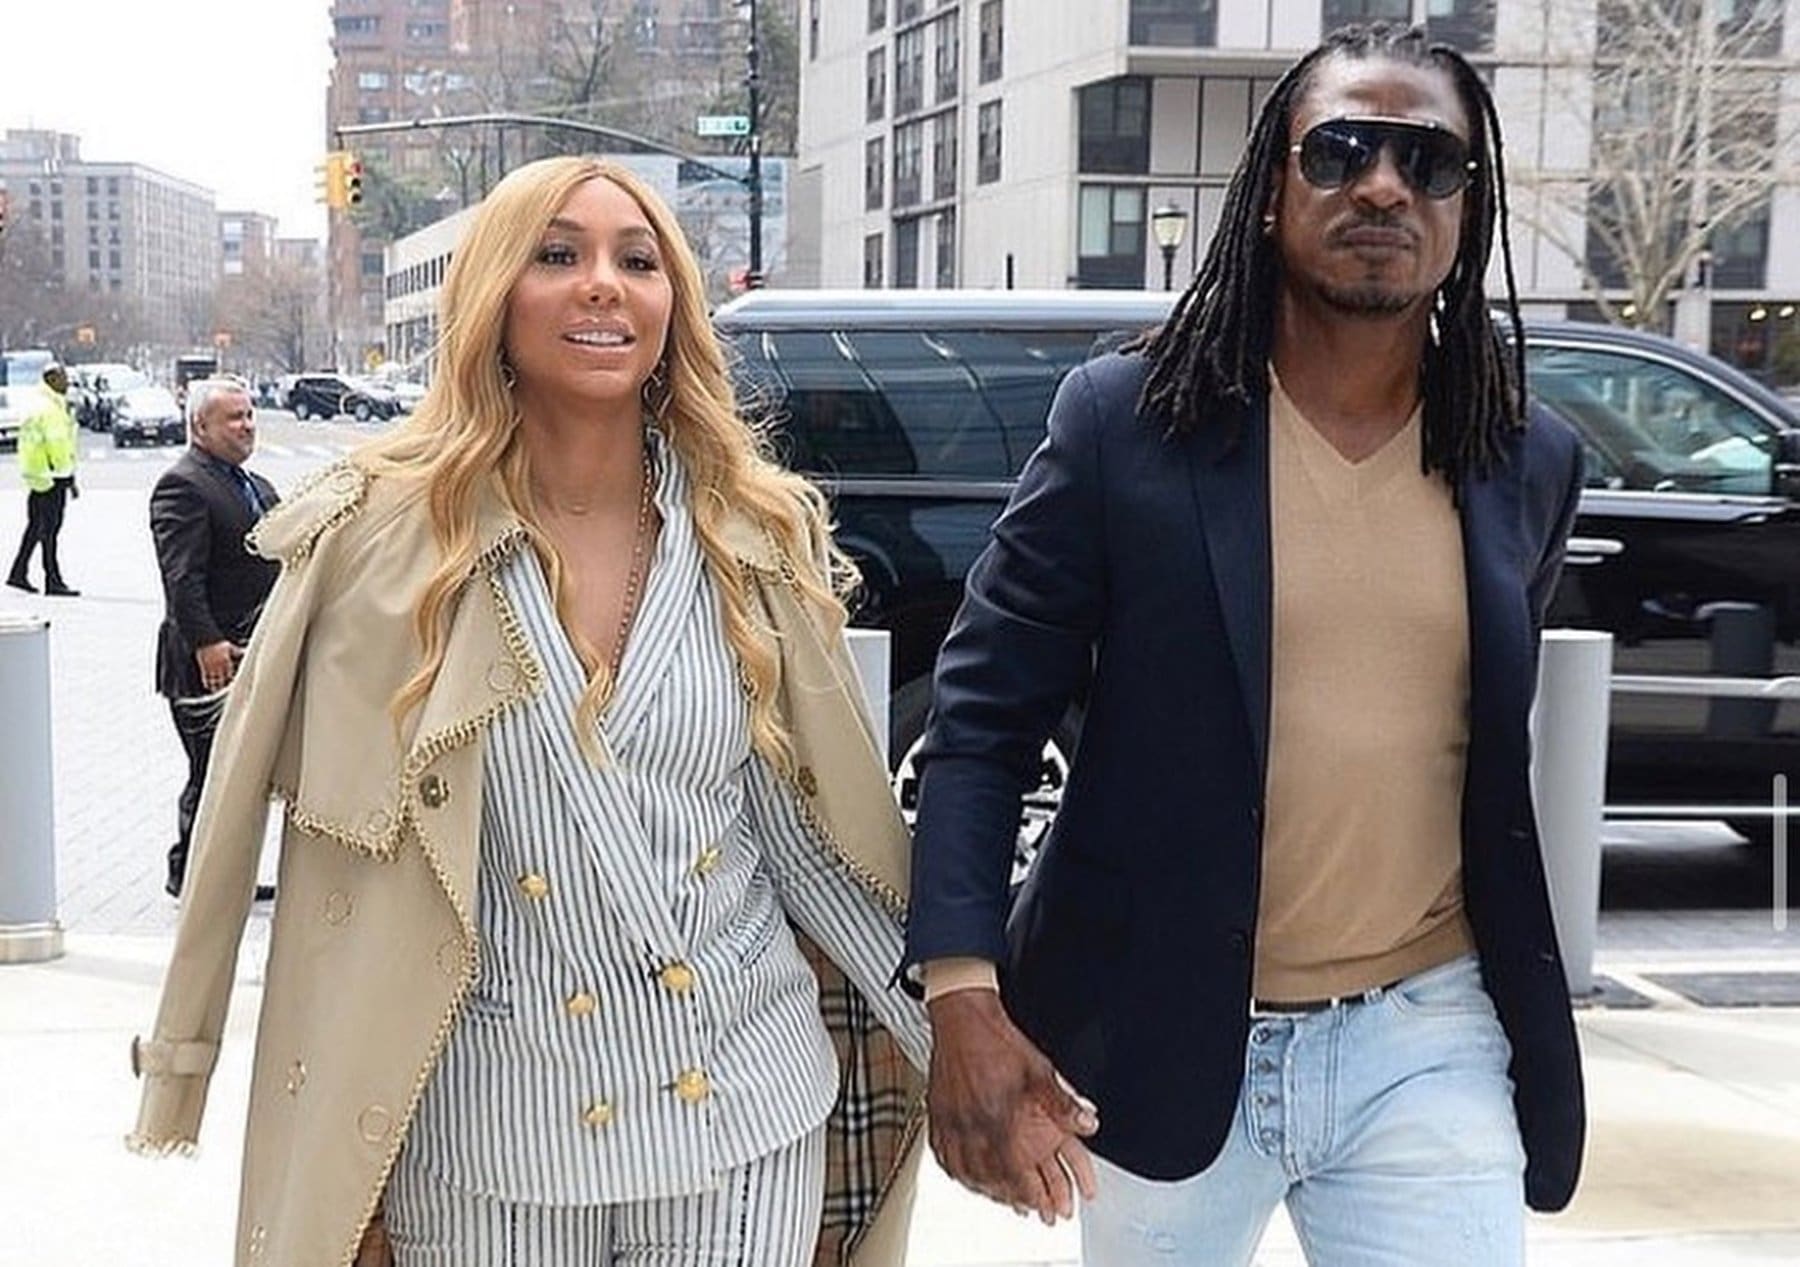 Tamar Braxton Calls David Adefeso Her 'Husband' And Fans Go Crazy With Excitement